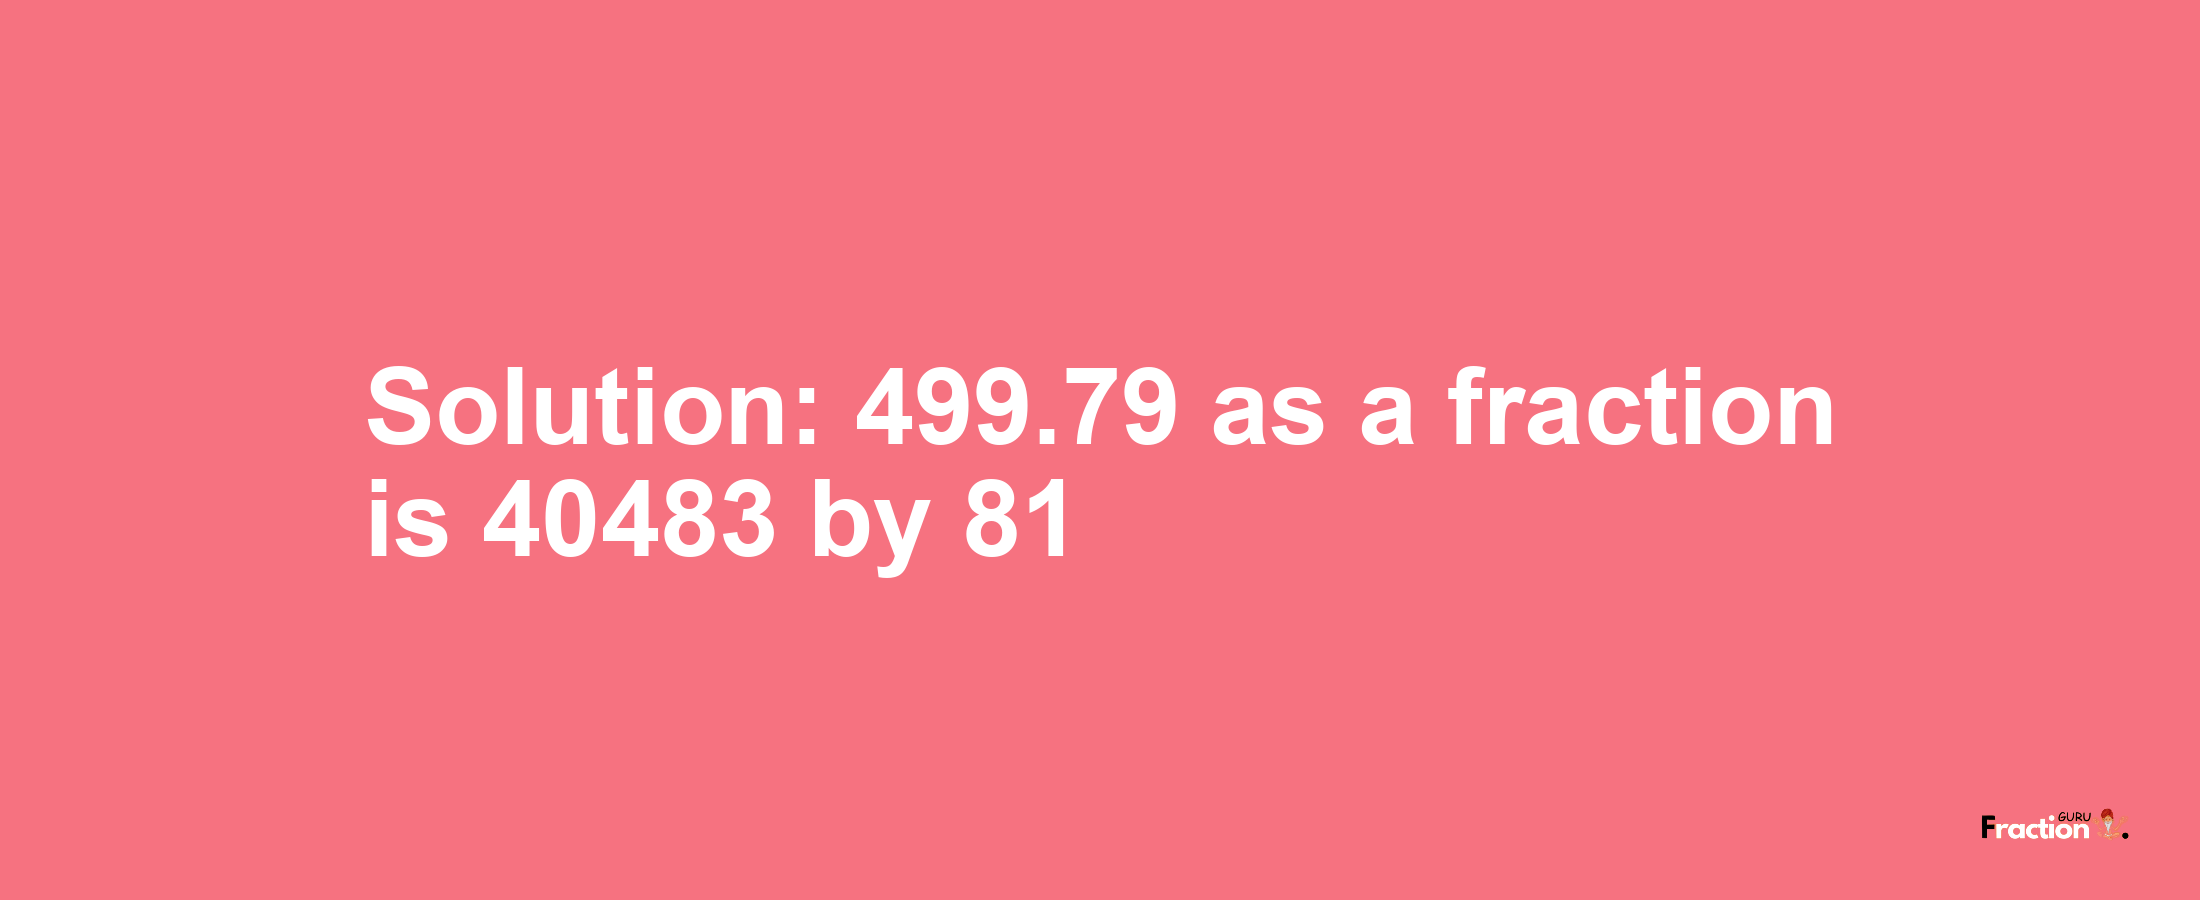 Solution:499.79 as a fraction is 40483/81